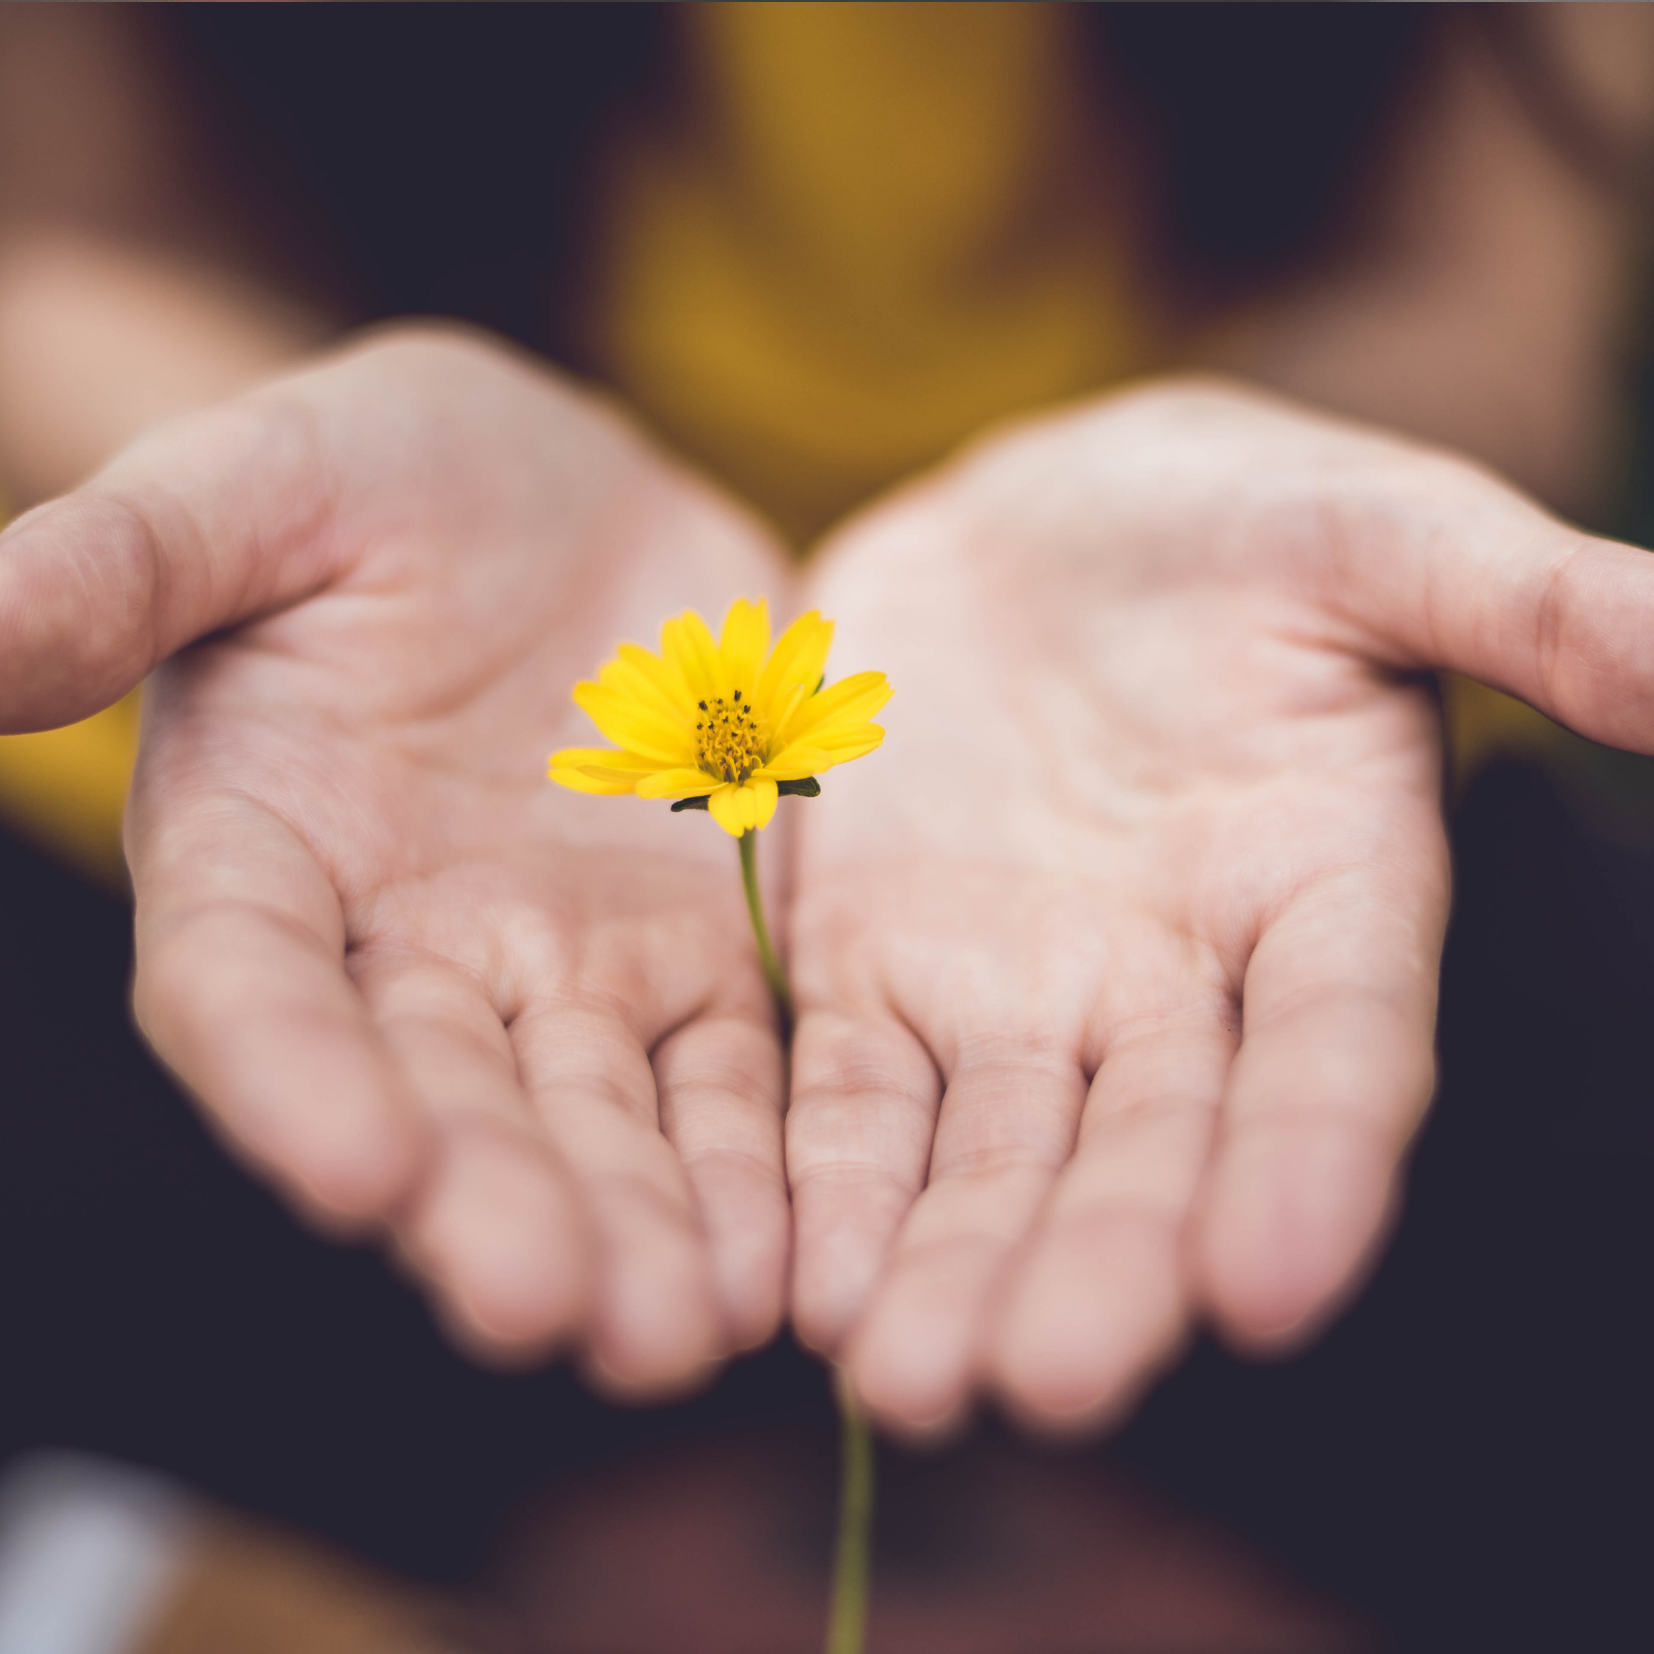 Hands offering small yellow flower depicting Disordered Eating